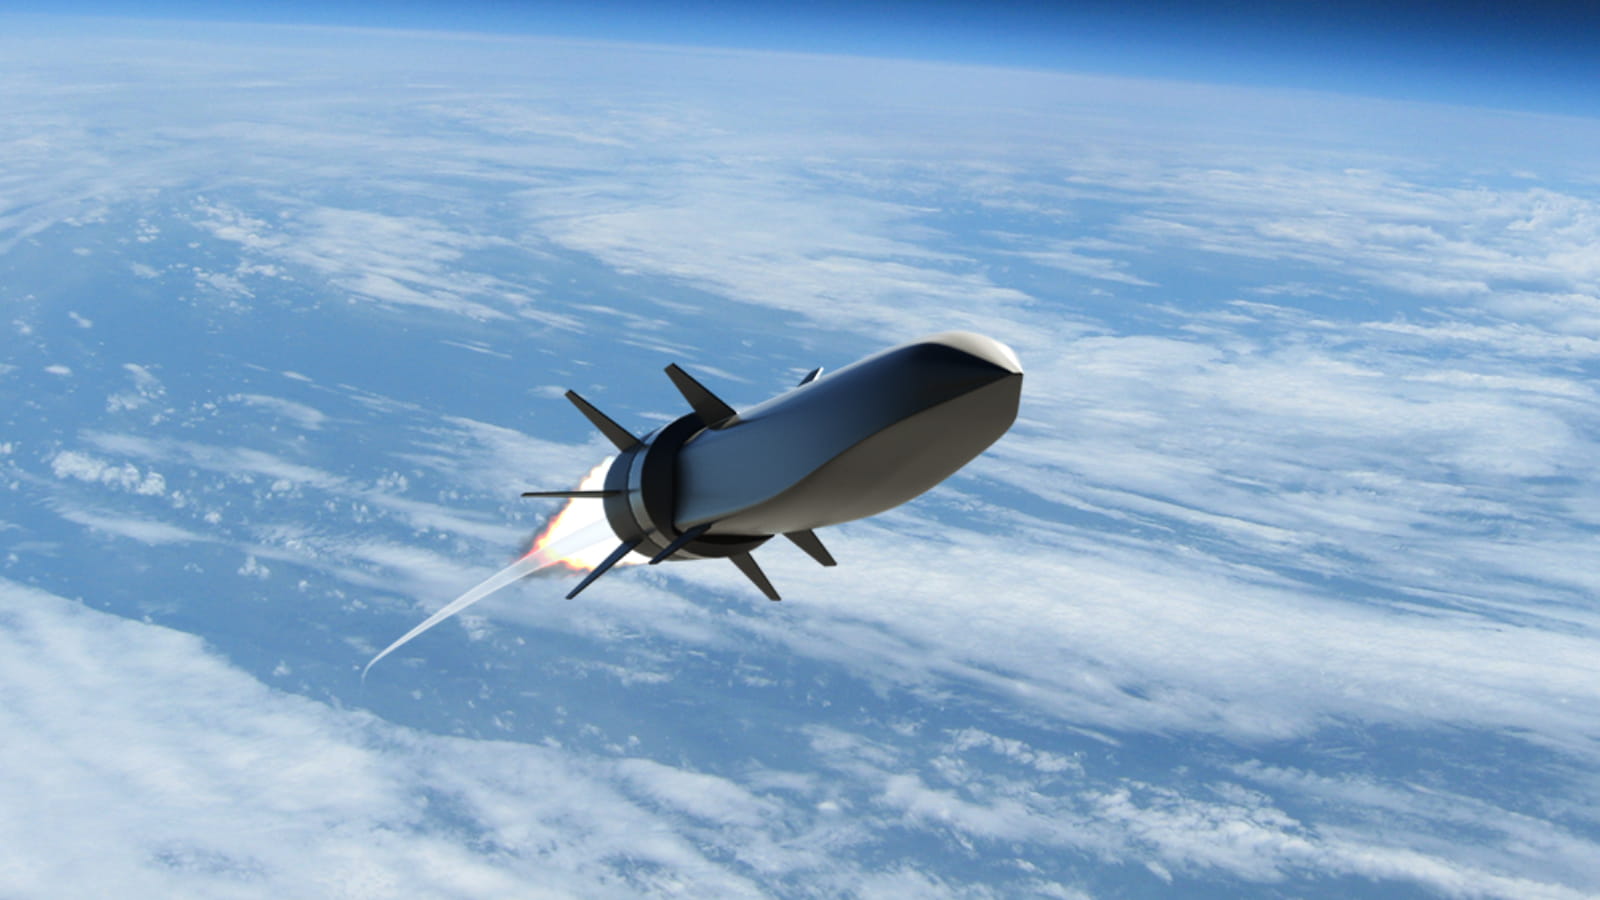 Hypersonic Air-breathing Weapon Concept, or HAWC, for the Defense Advanced Research Projects Agency and the U.S. Air Force.